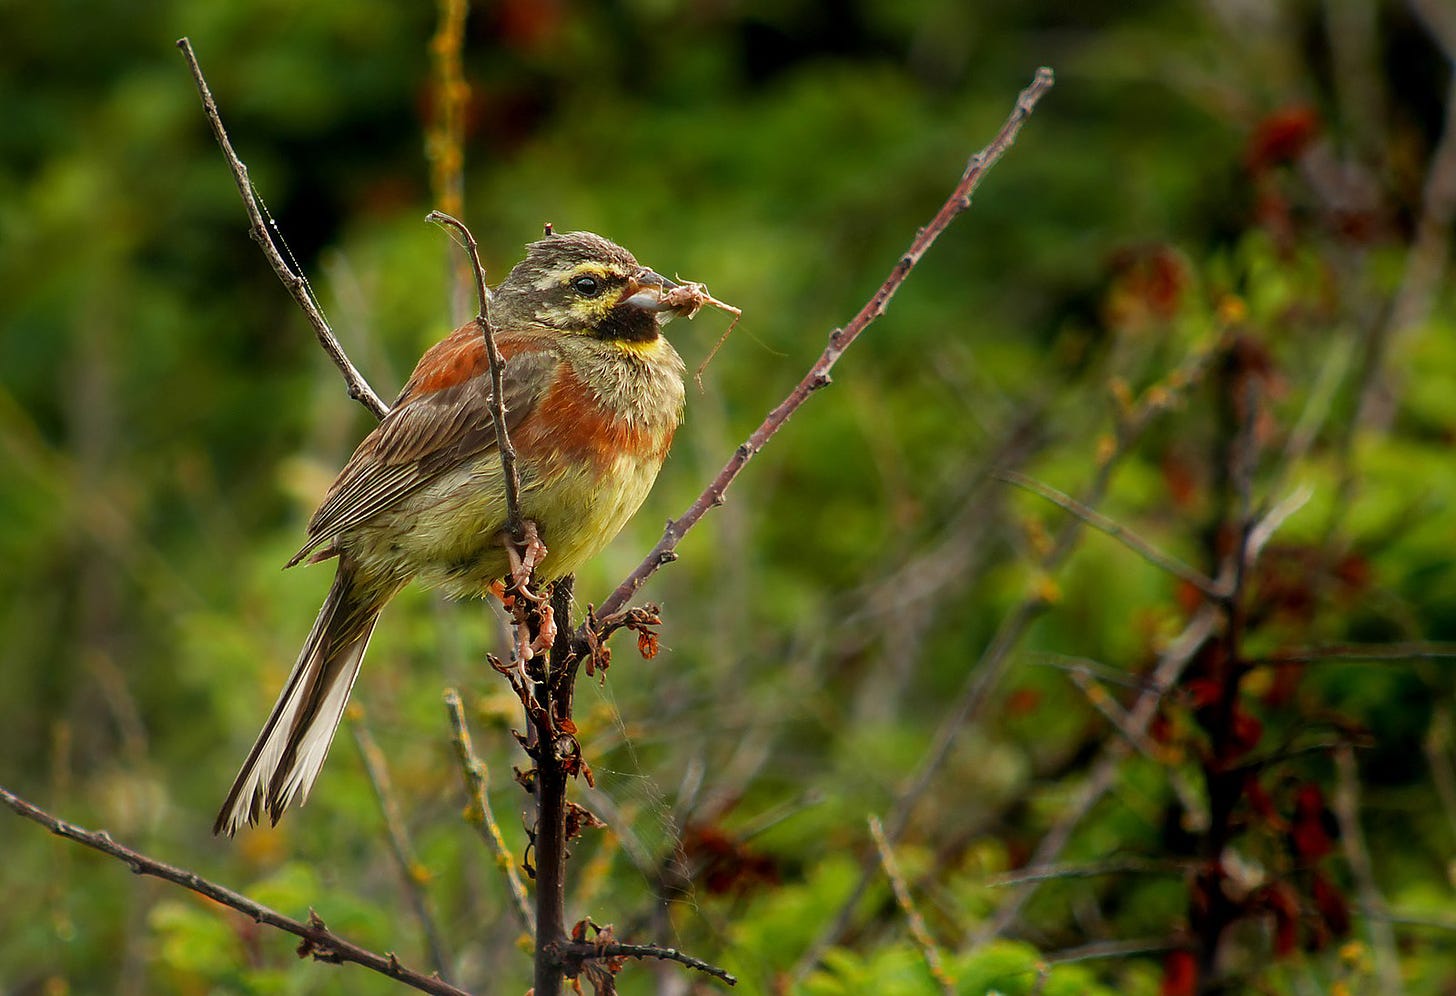 Adult male cirl bunting - yellow, black and rust-orange coloured bird - sitting on a twig with a large invertegrate in its beak